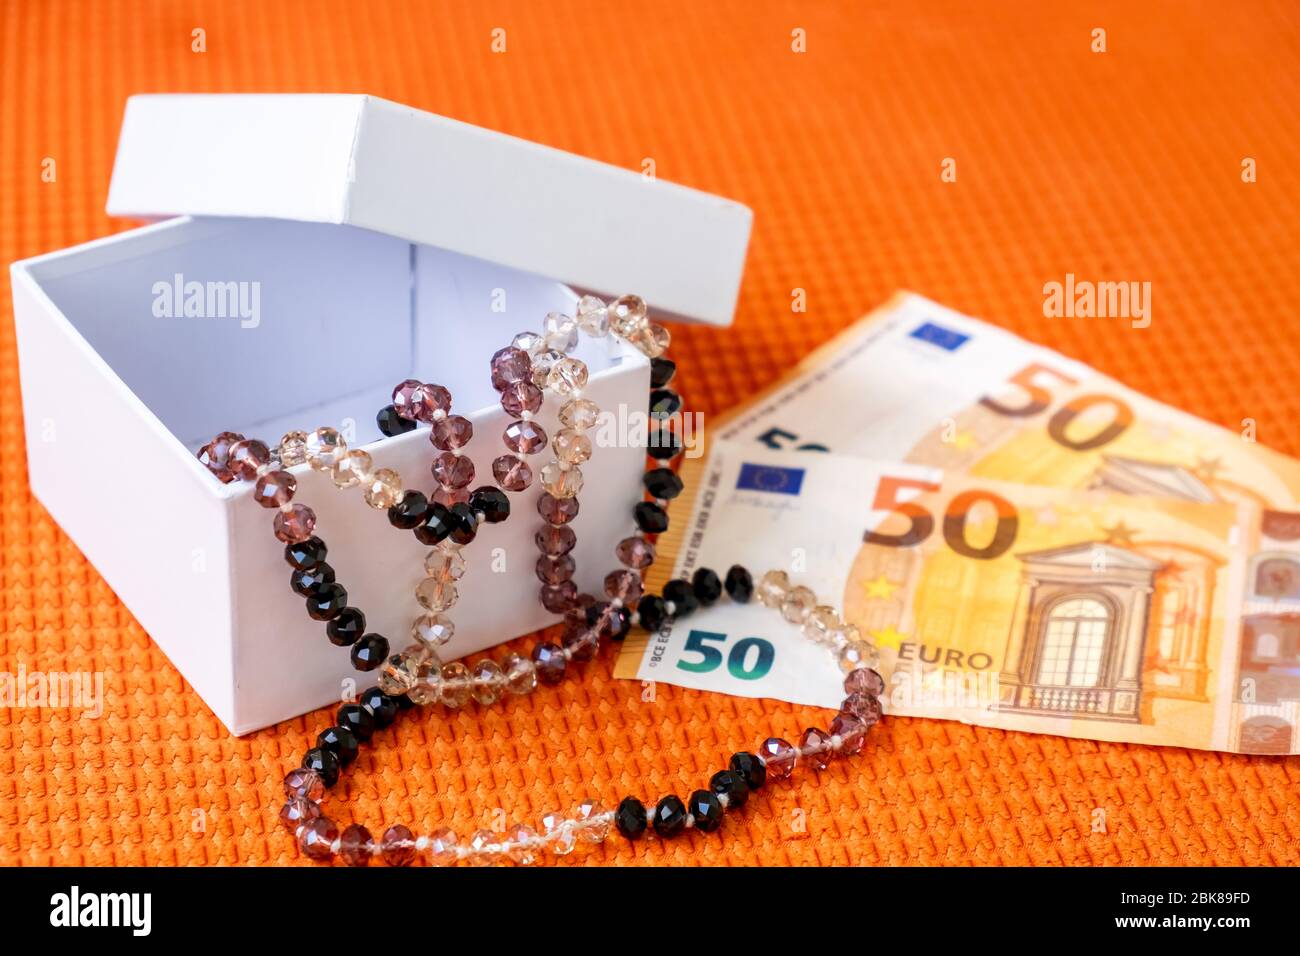 Beautiful Female Beads in White Gift Box and Paper Banknotes Euro Lay on a Orange Fabric Textured Background. Stock Photo